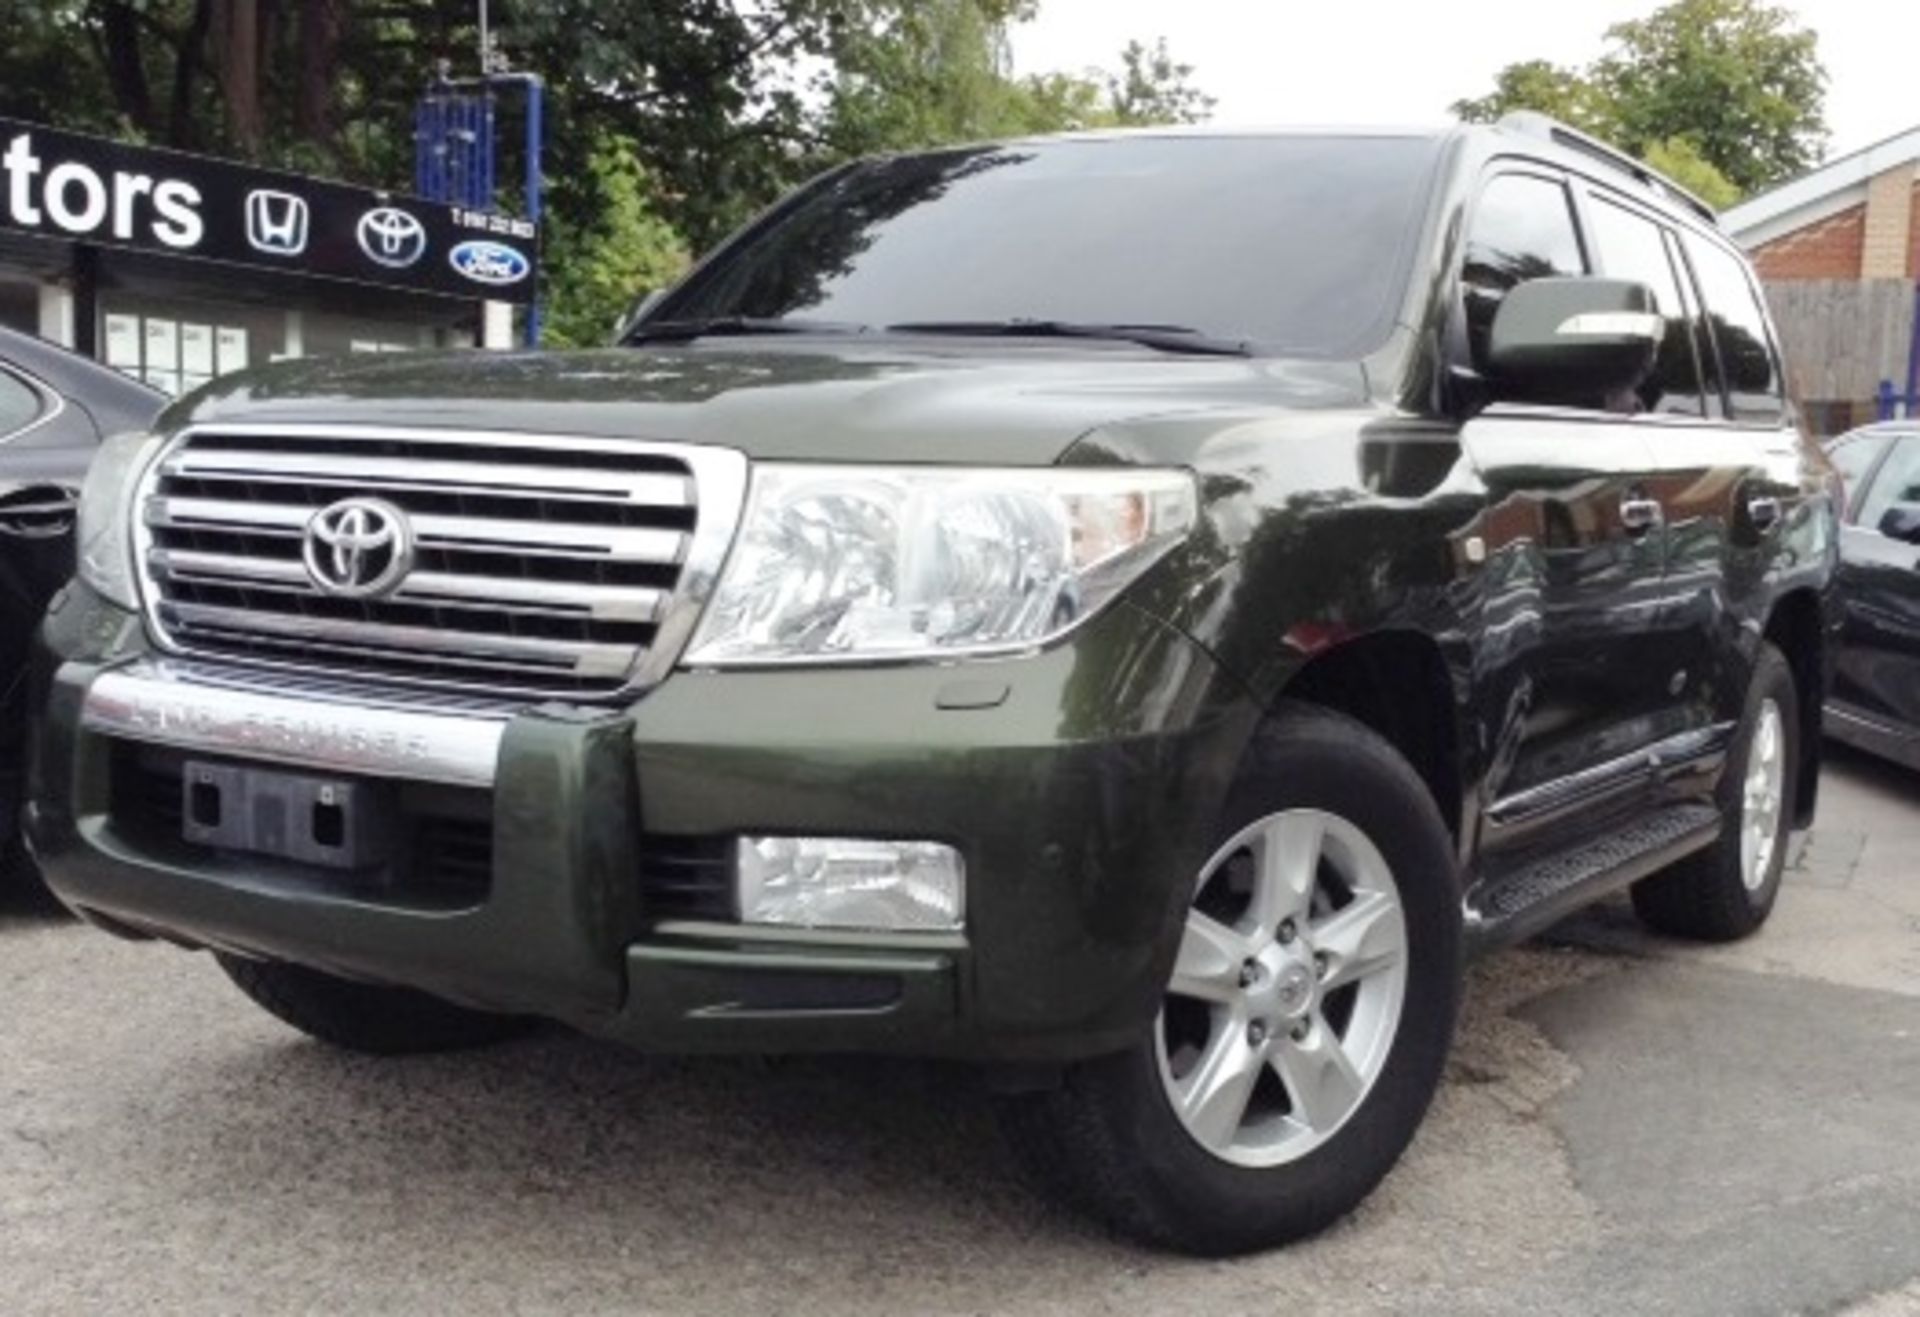 1 x Toyota Land Cruiser Amazon V8 VX-R 4.7 Petrol - Year 2010 - Left Hand Drive - Middle Eastern - Image 9 of 15